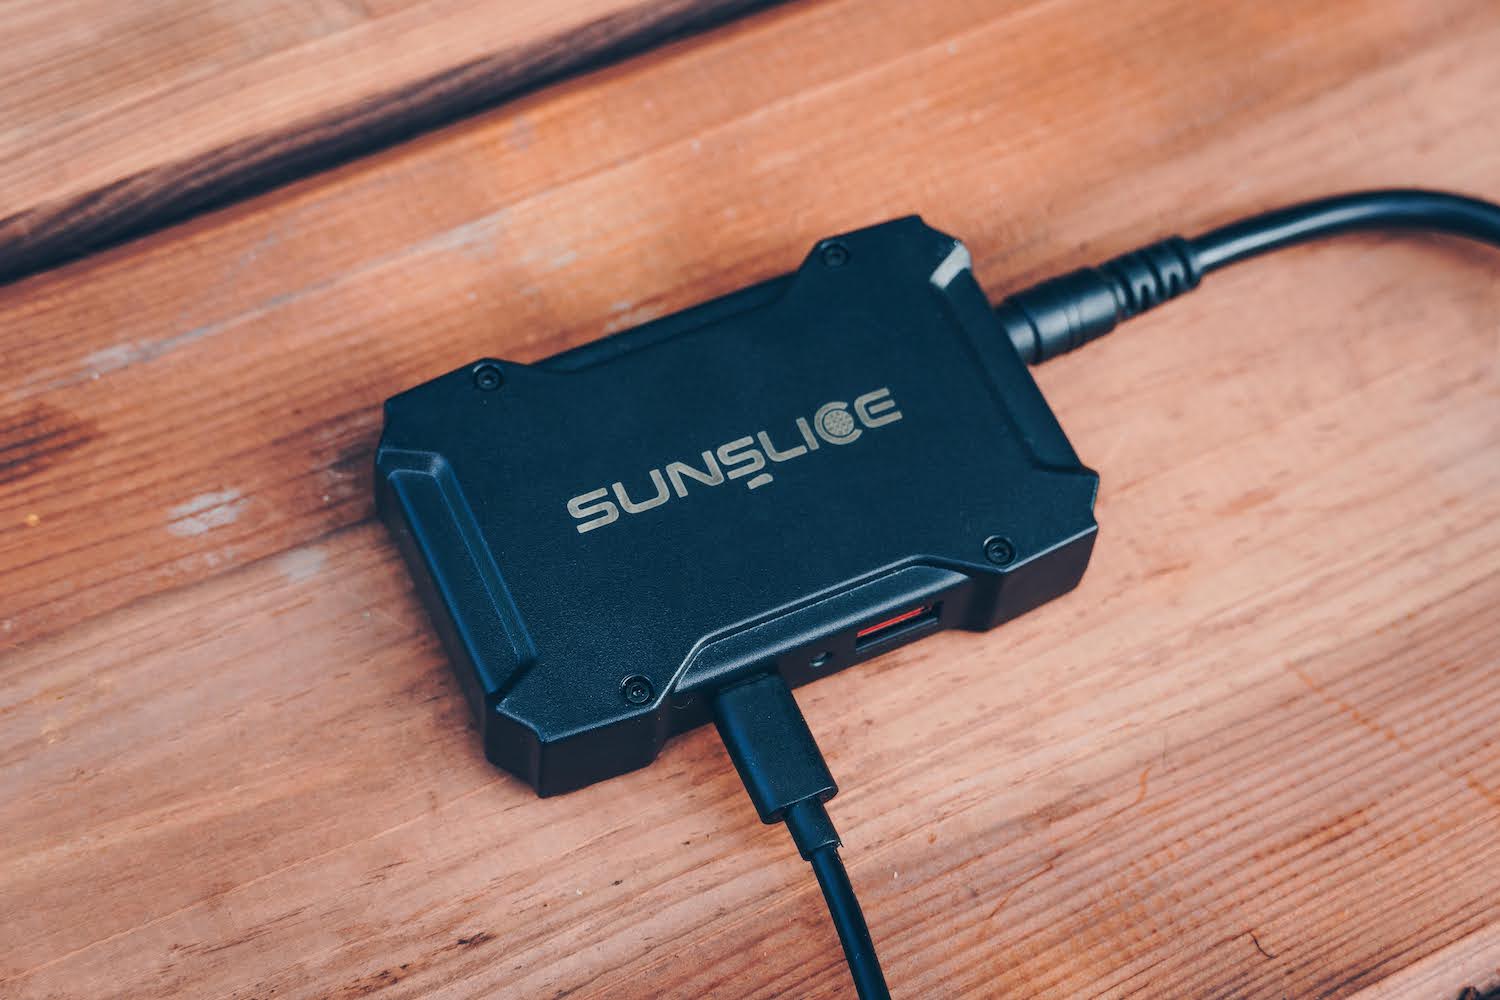 Sunslice junction box on a table connected by the DC5521 port and the USB-C port